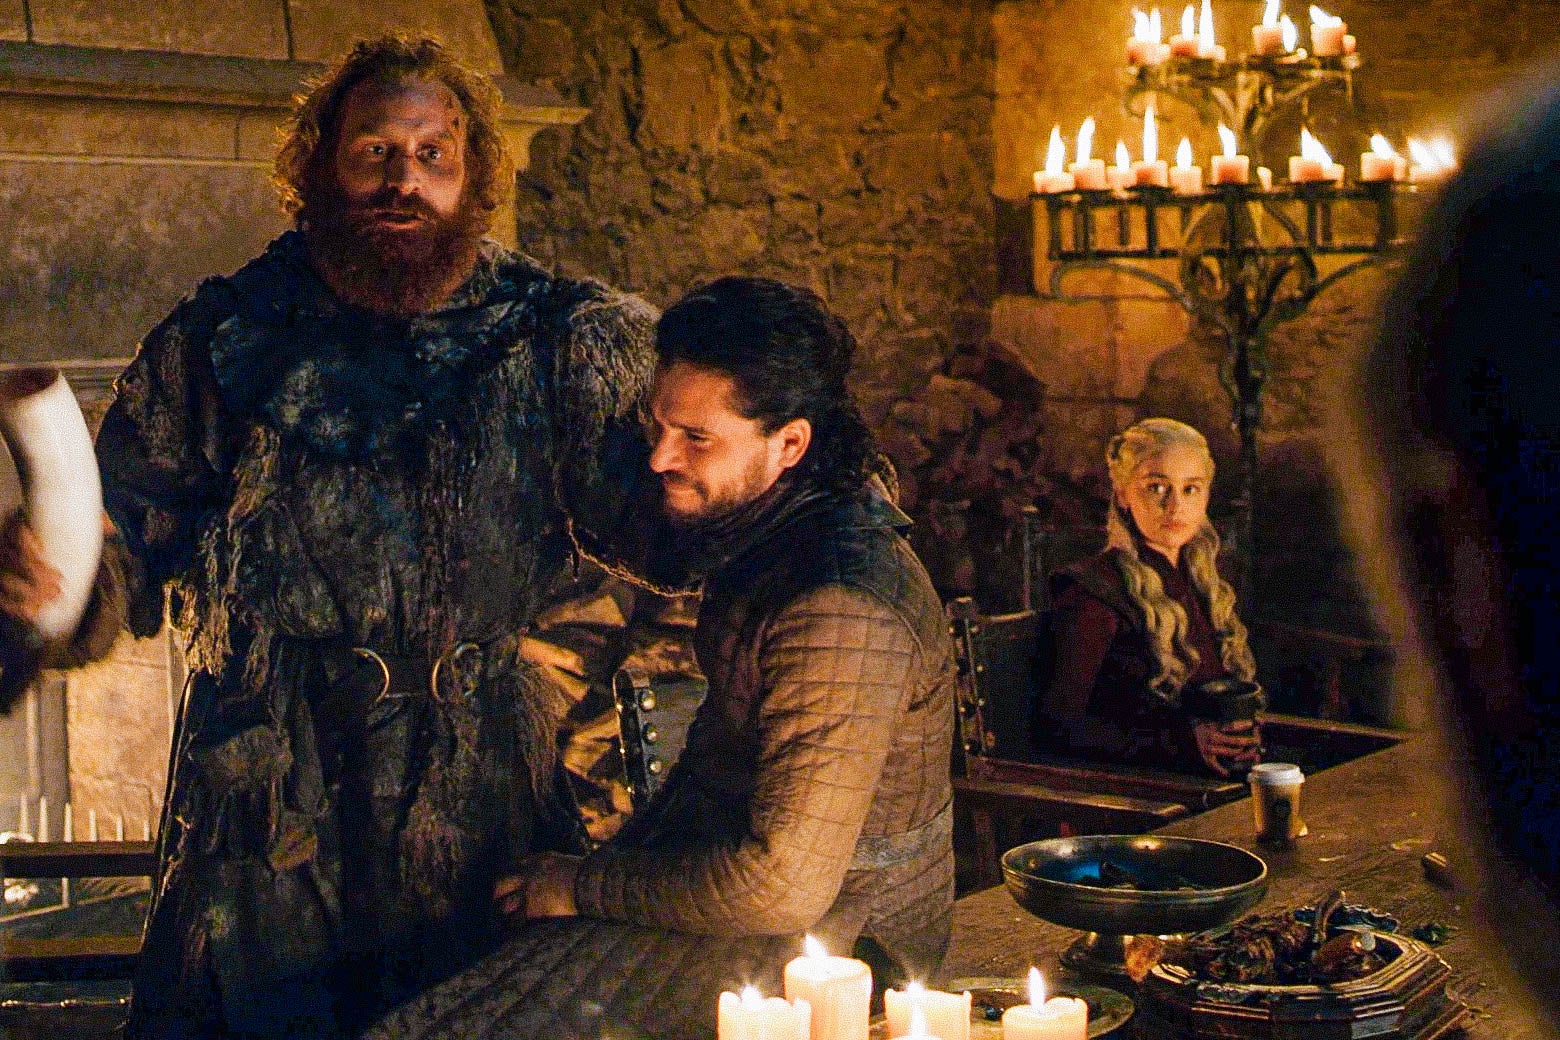 A shot from Game of Thrones in which a disposable coffee cup is on the table at an old-timey banquet.